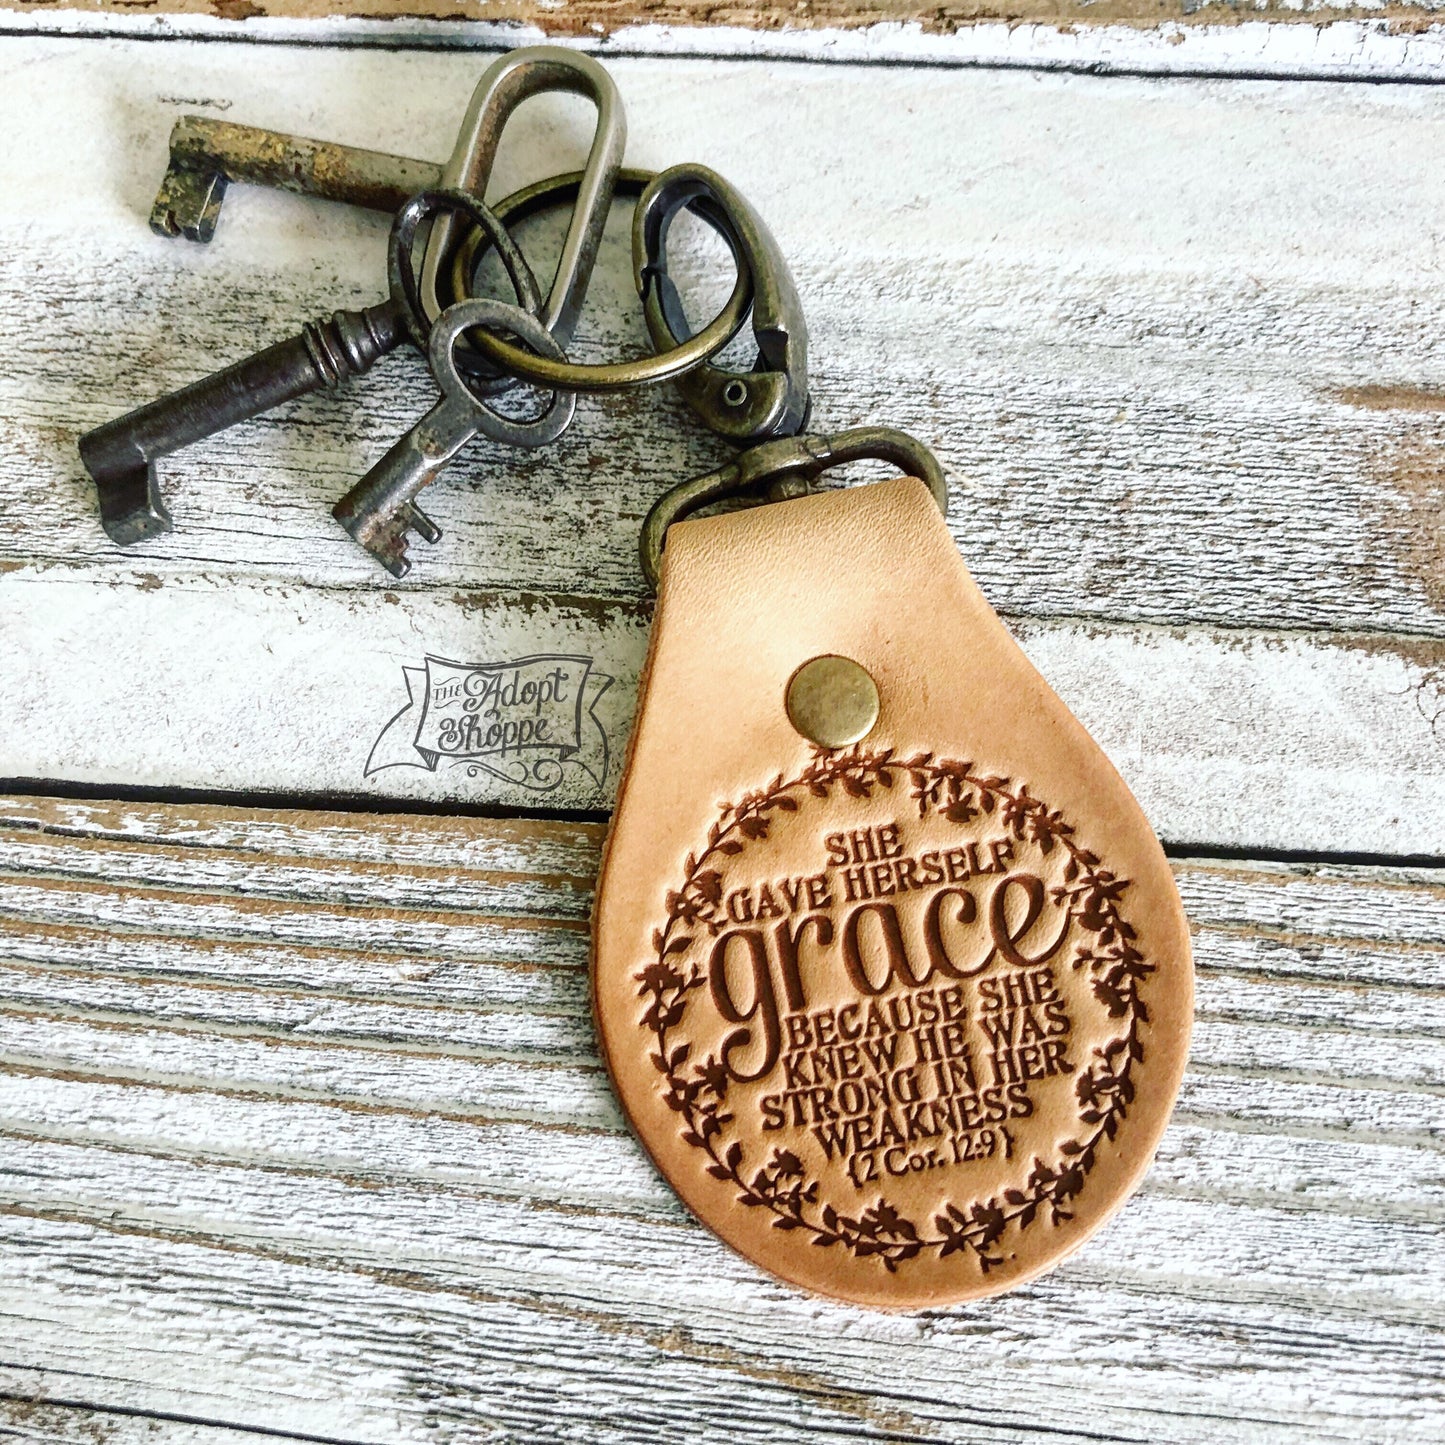 she gave herself grace because she knew He was strong in her weakness (2 Corinthians 12:9) leather key fob ring (camel/natural)